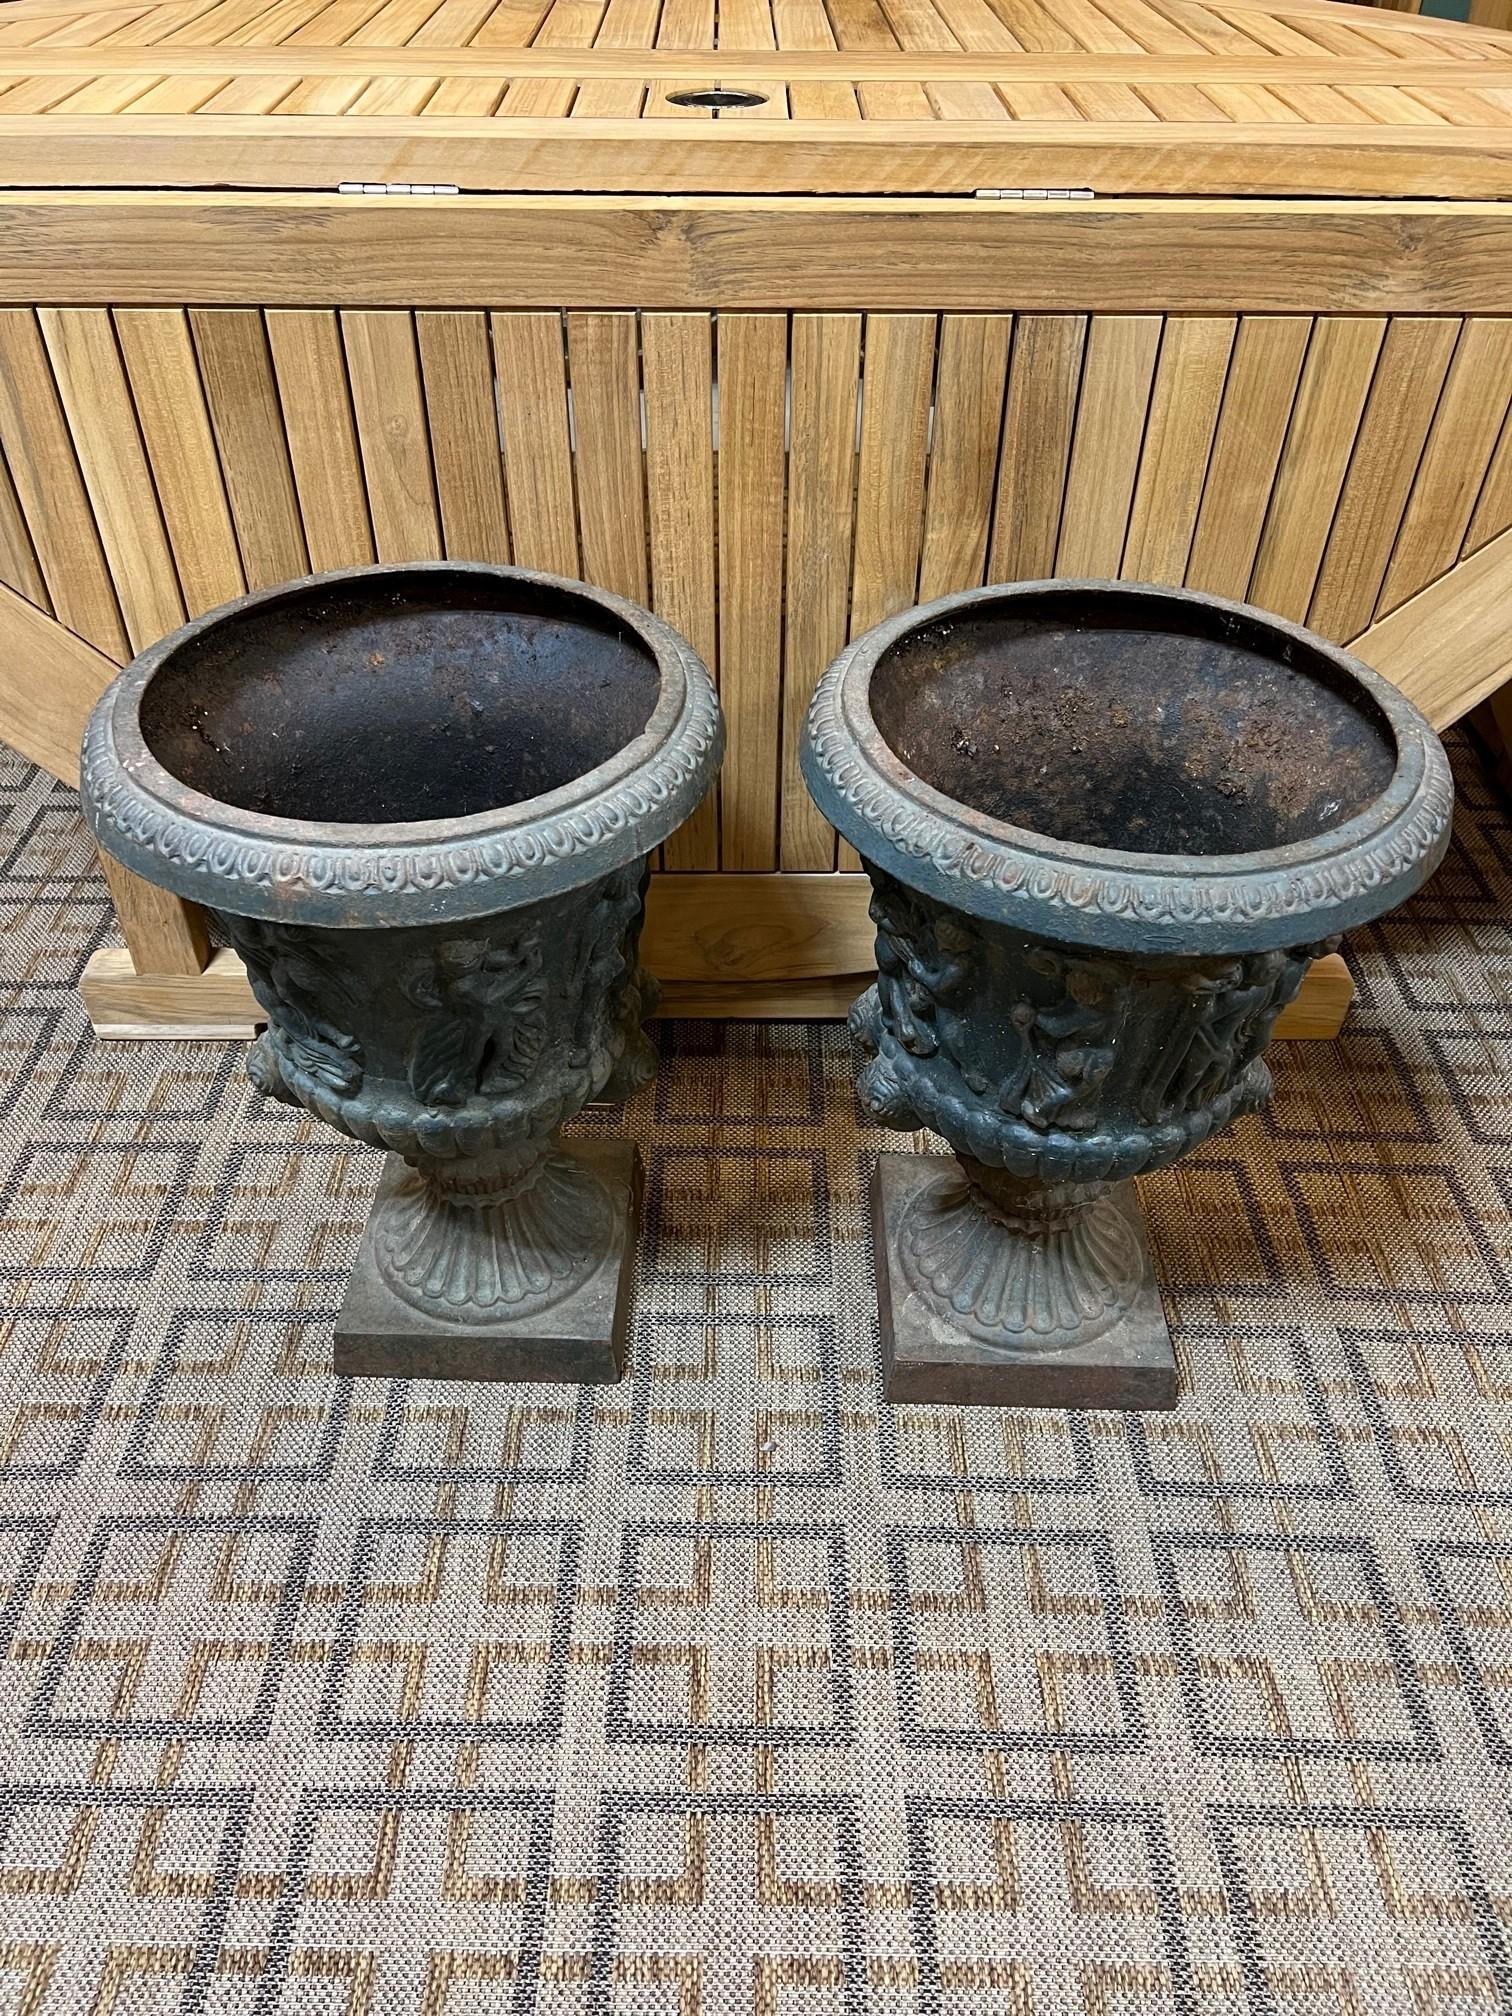 Neoclassical Revival Early 20th Century Pair of Neoclassical Style Cast Iron Garden Urns